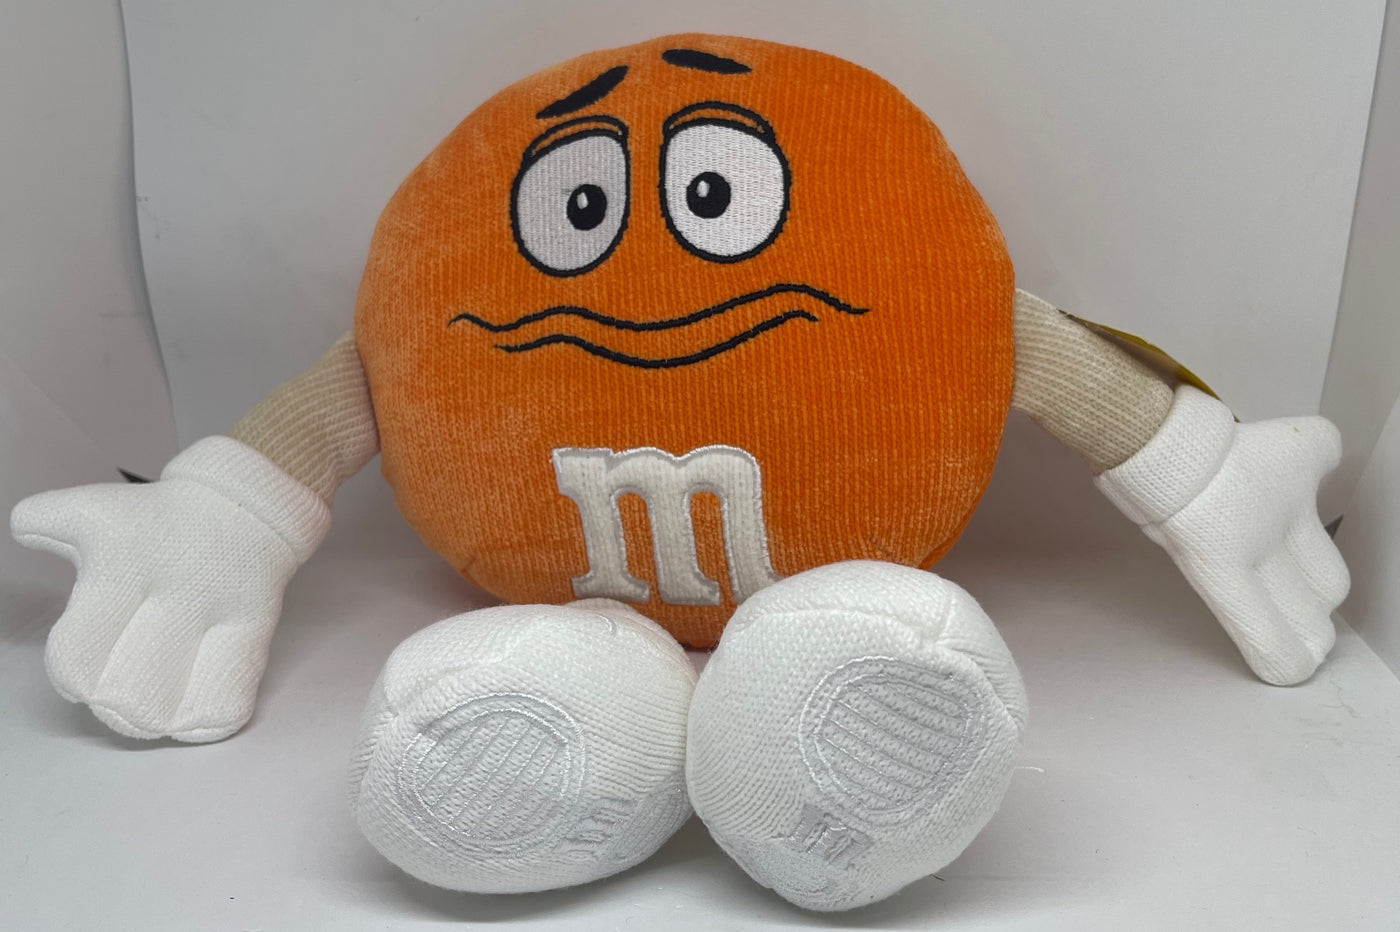 M&M's World Orange Character Big Face Plush New with Tags